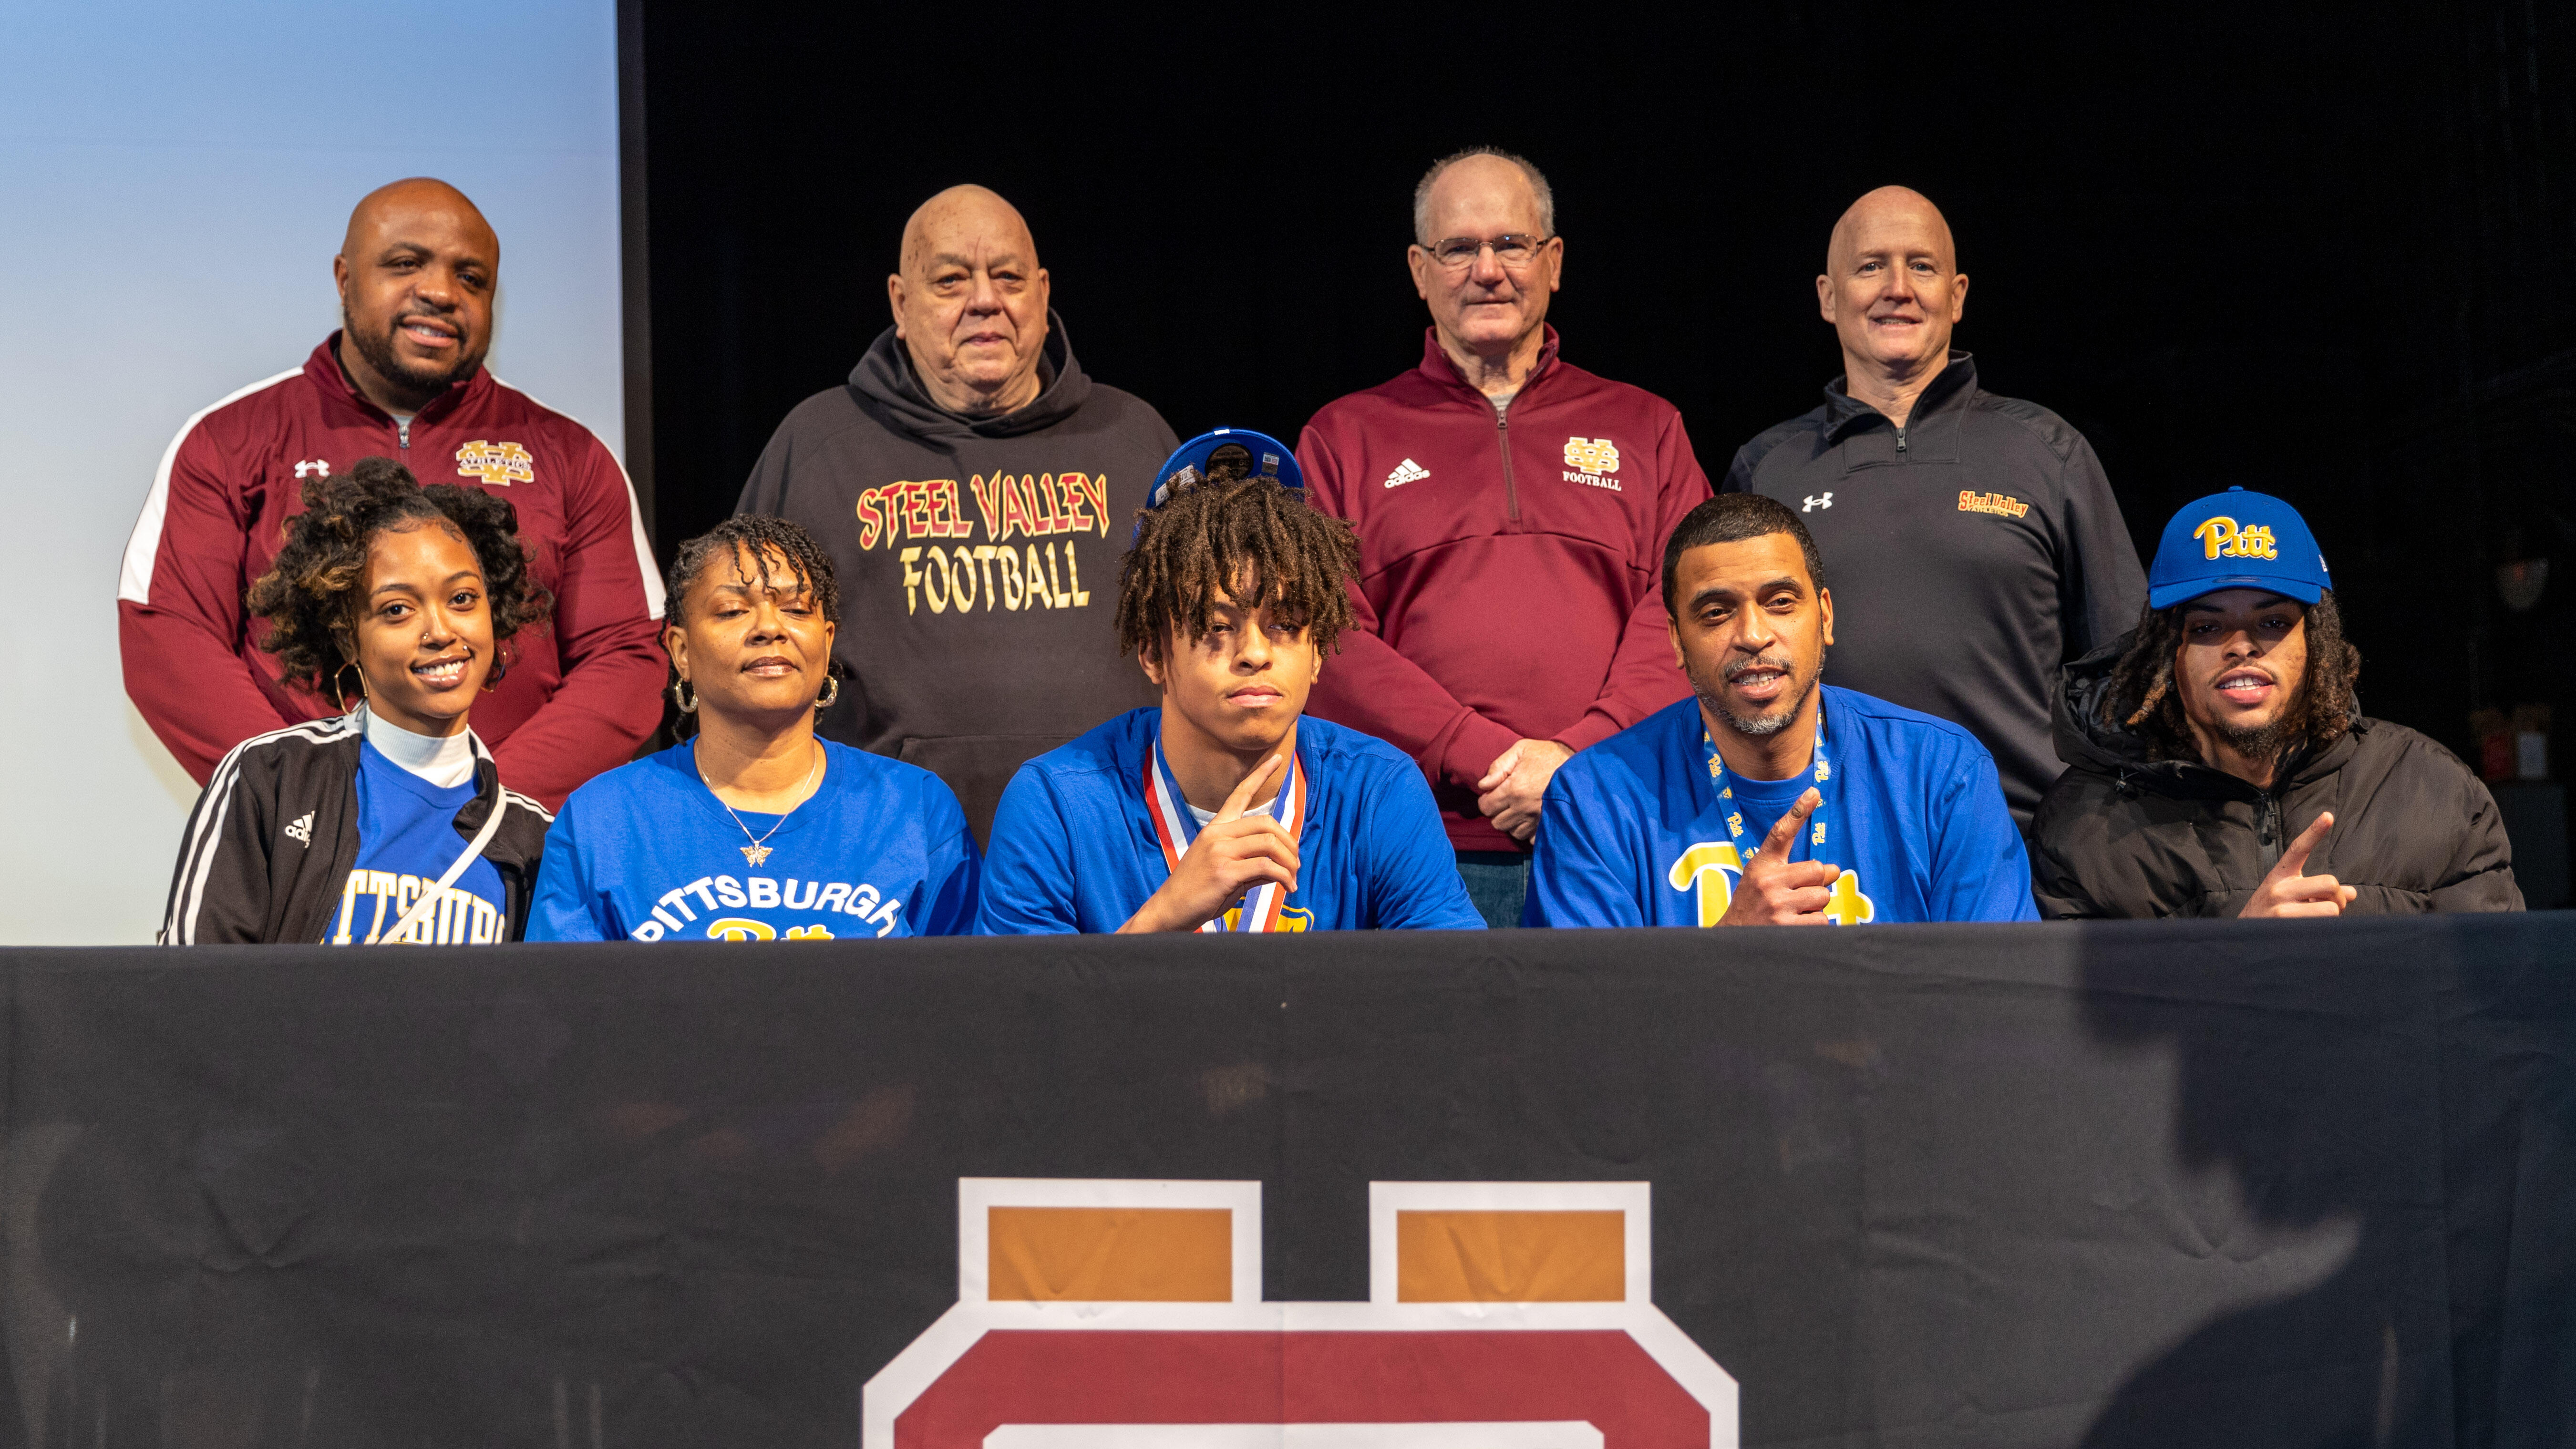 Cruce Brookins poses for a photo with his family and coaches. He is seated at a table on a stage.